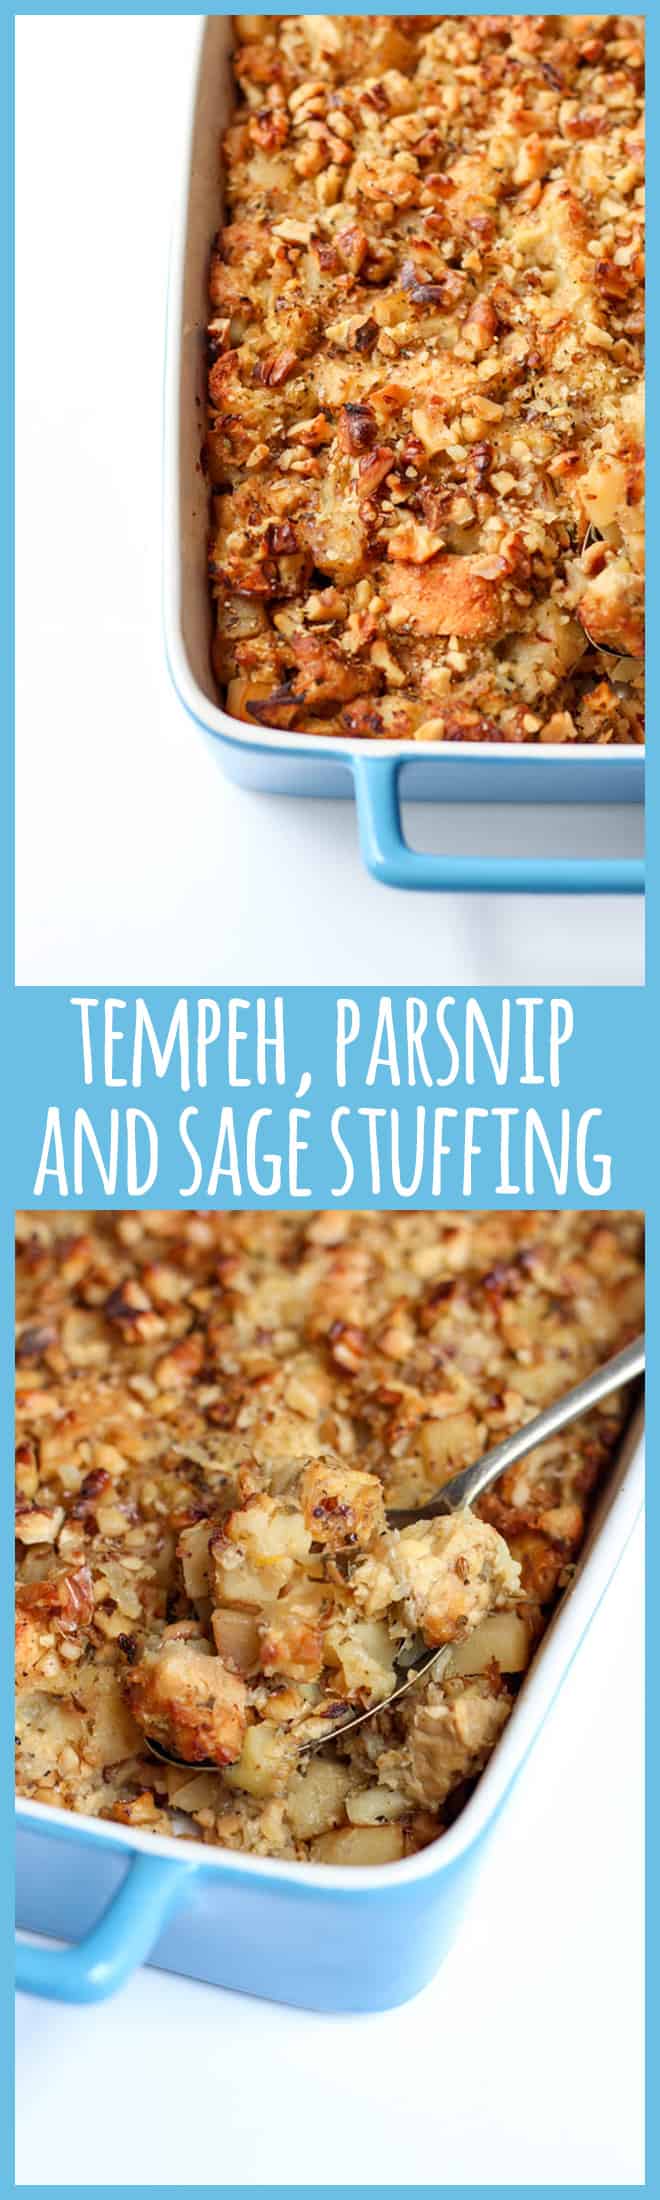 This delicious vegan stuffing features tempeh, parsnip, apple, sage and walnuts. It's packed with flavour and perfect to feed a crowd at Christmas or your next potluck.